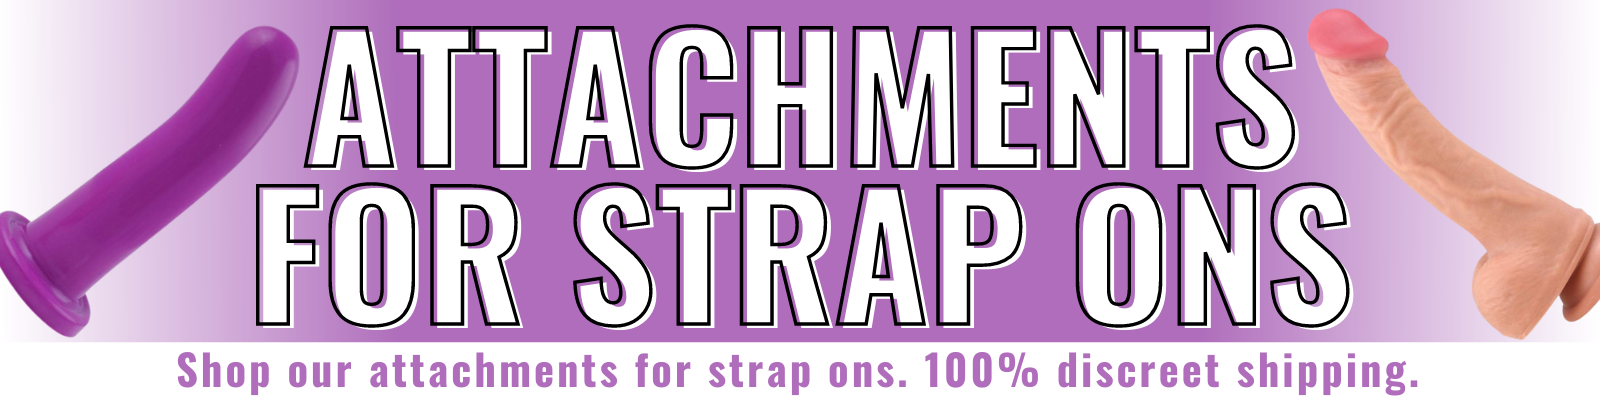 Banner for our attachments for strap ons. Banner reads: Attachments for strap ons. Shop our attachments for strap ons. 100% discreet shipping.